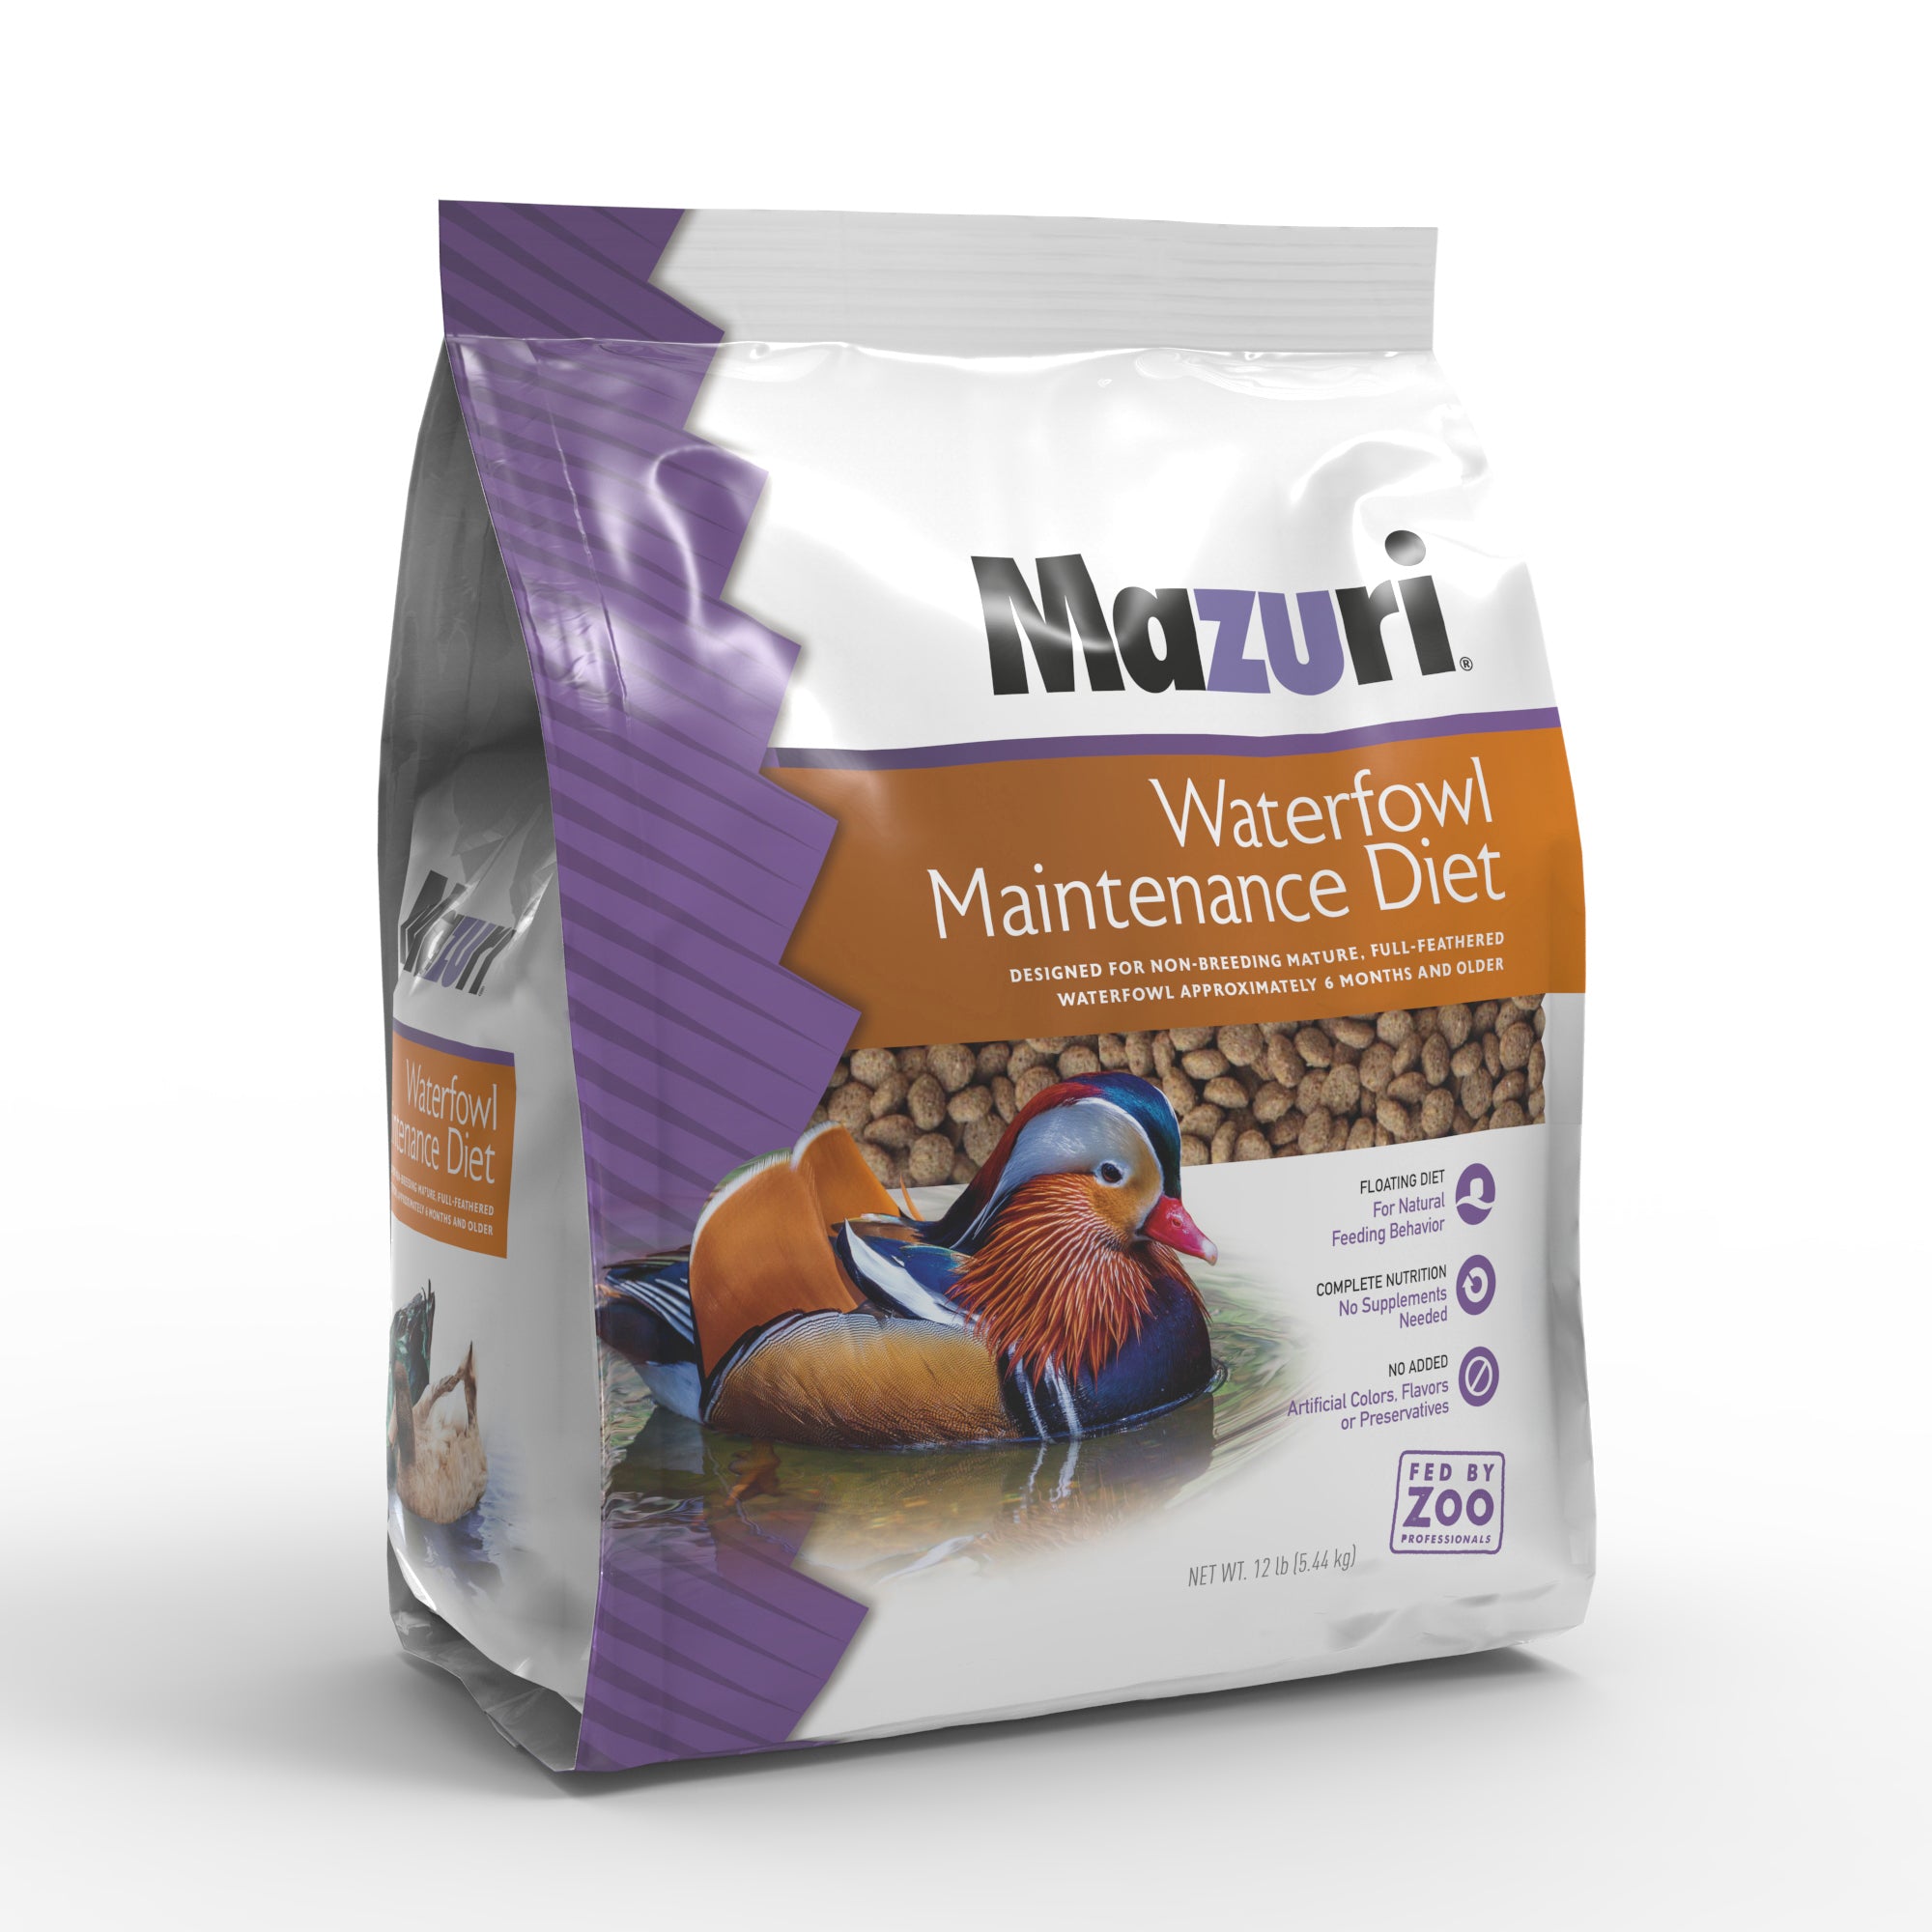 Waterfowl Maintenance Diet 12 lb bag front and gusset